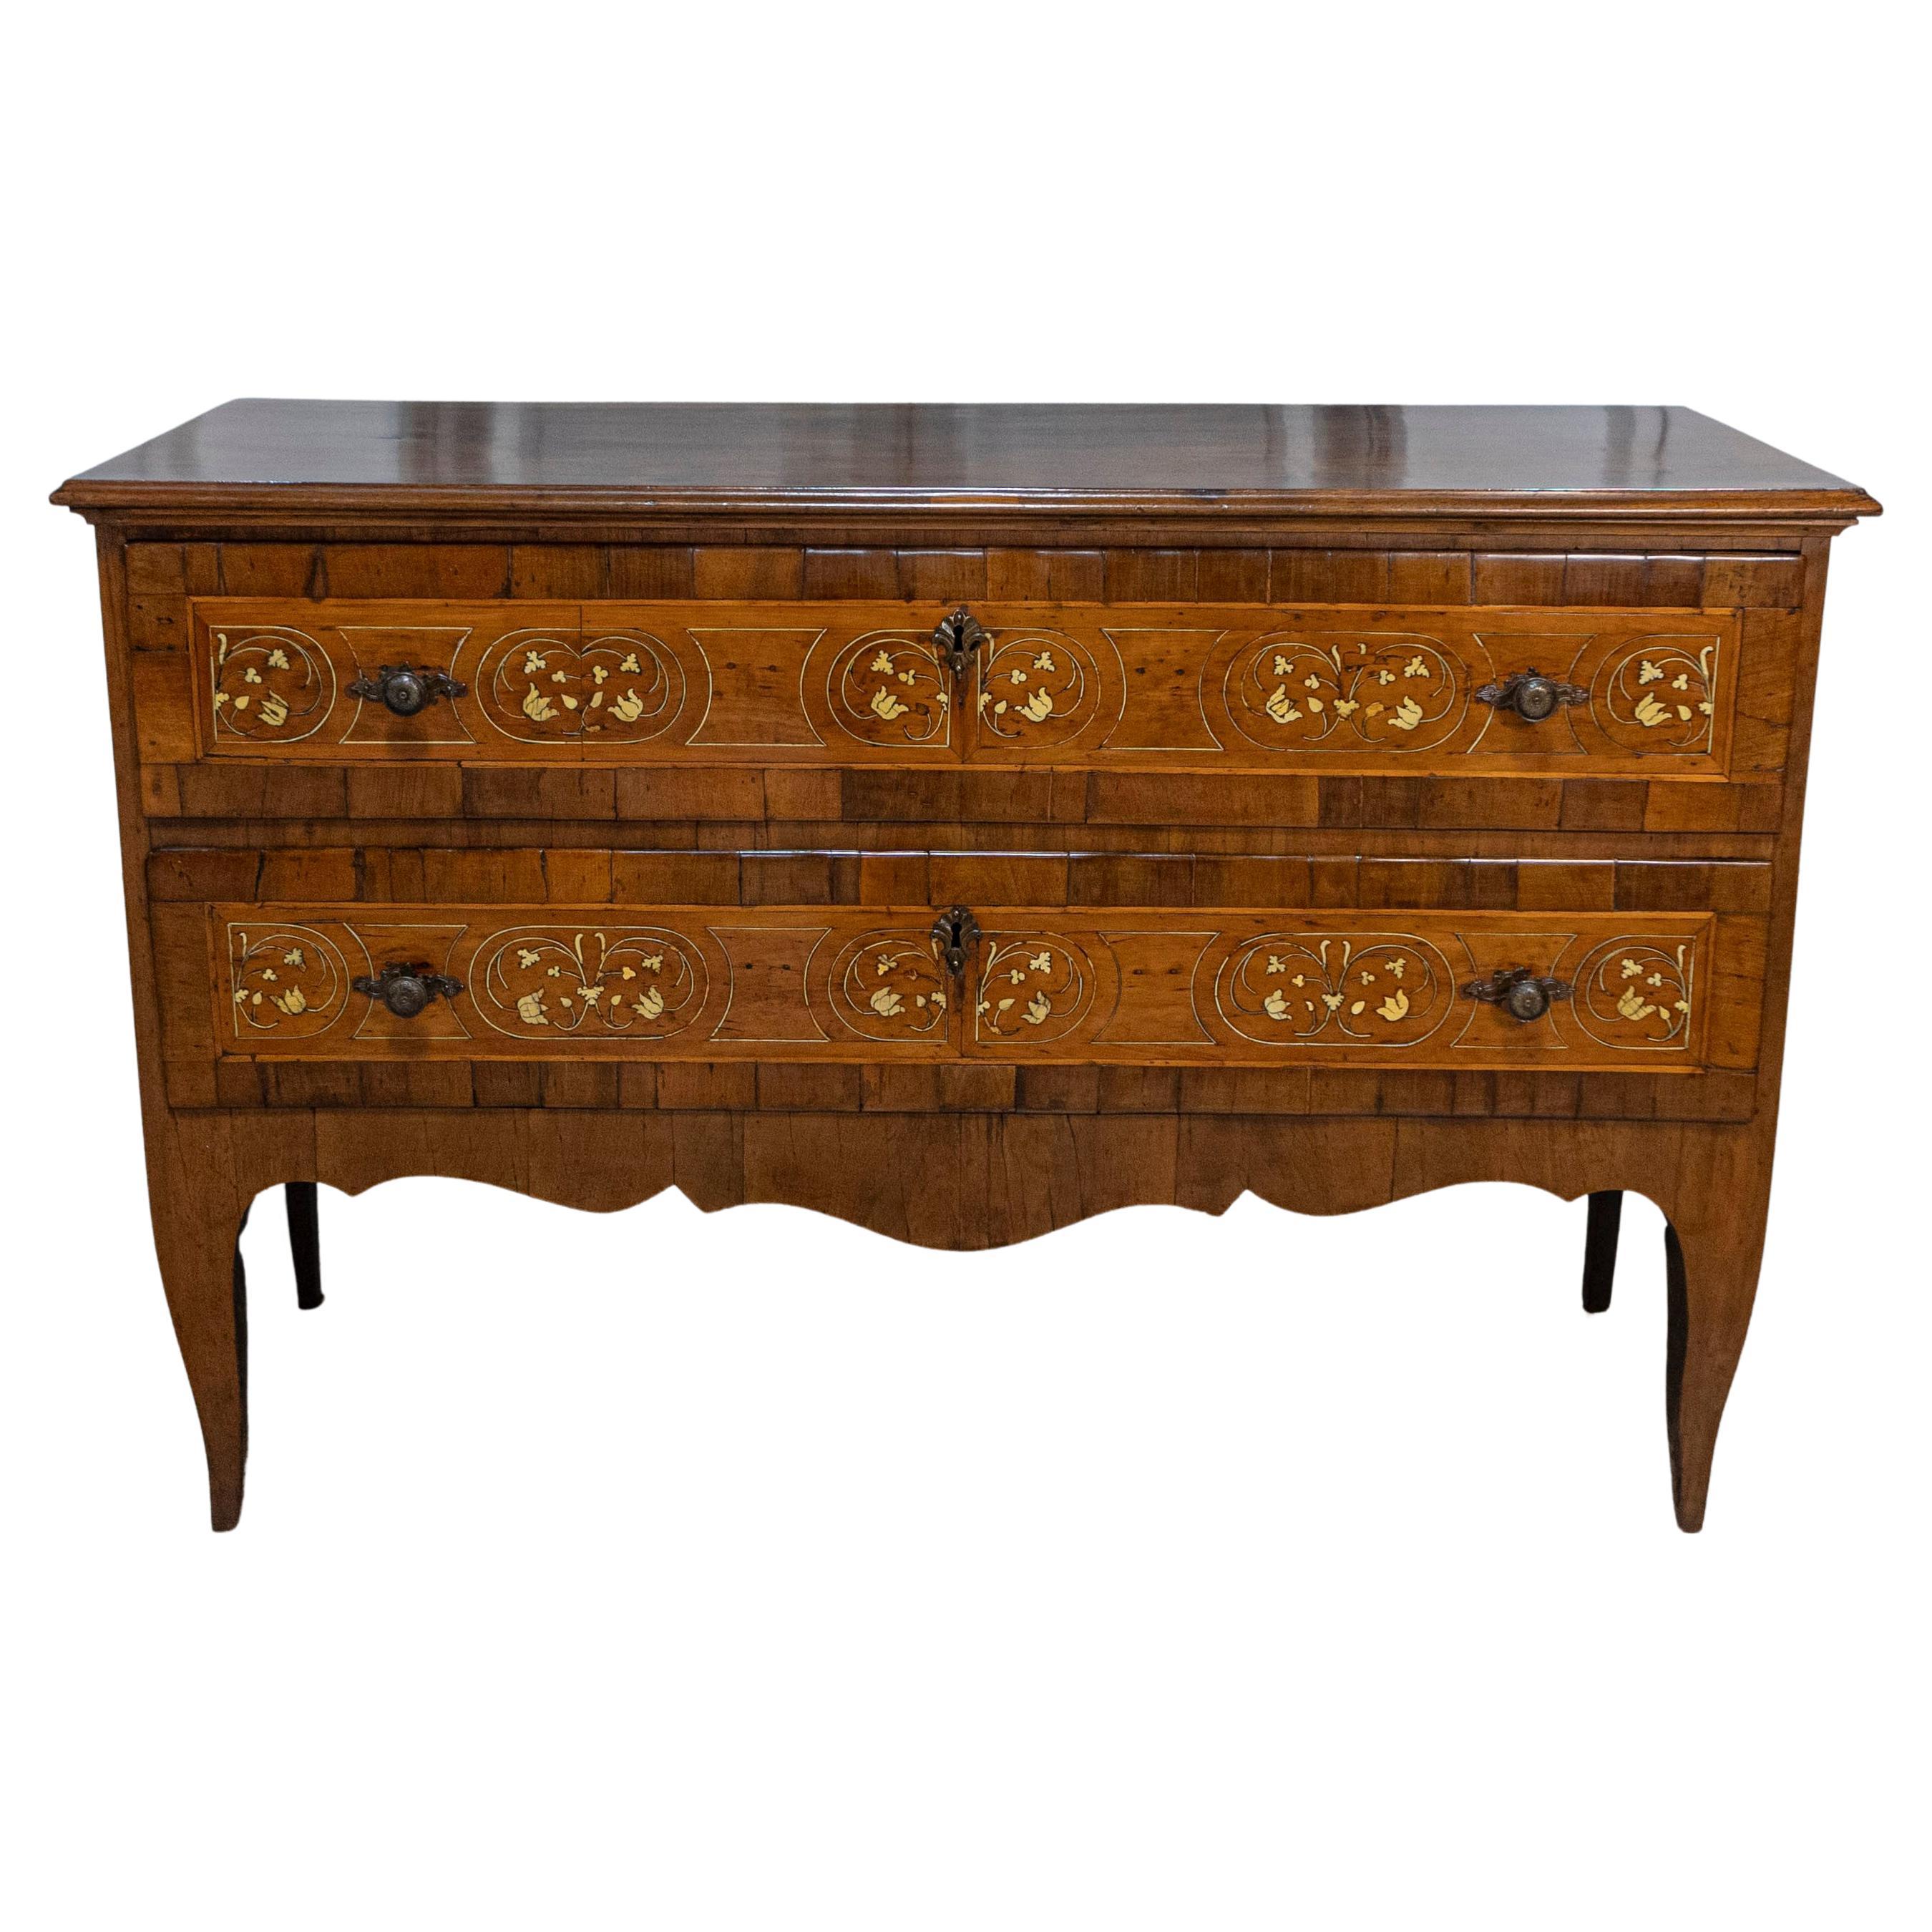 18th Century Italian Walnut, Mahogany and Ash Two-Drawer Commode with Marquetry